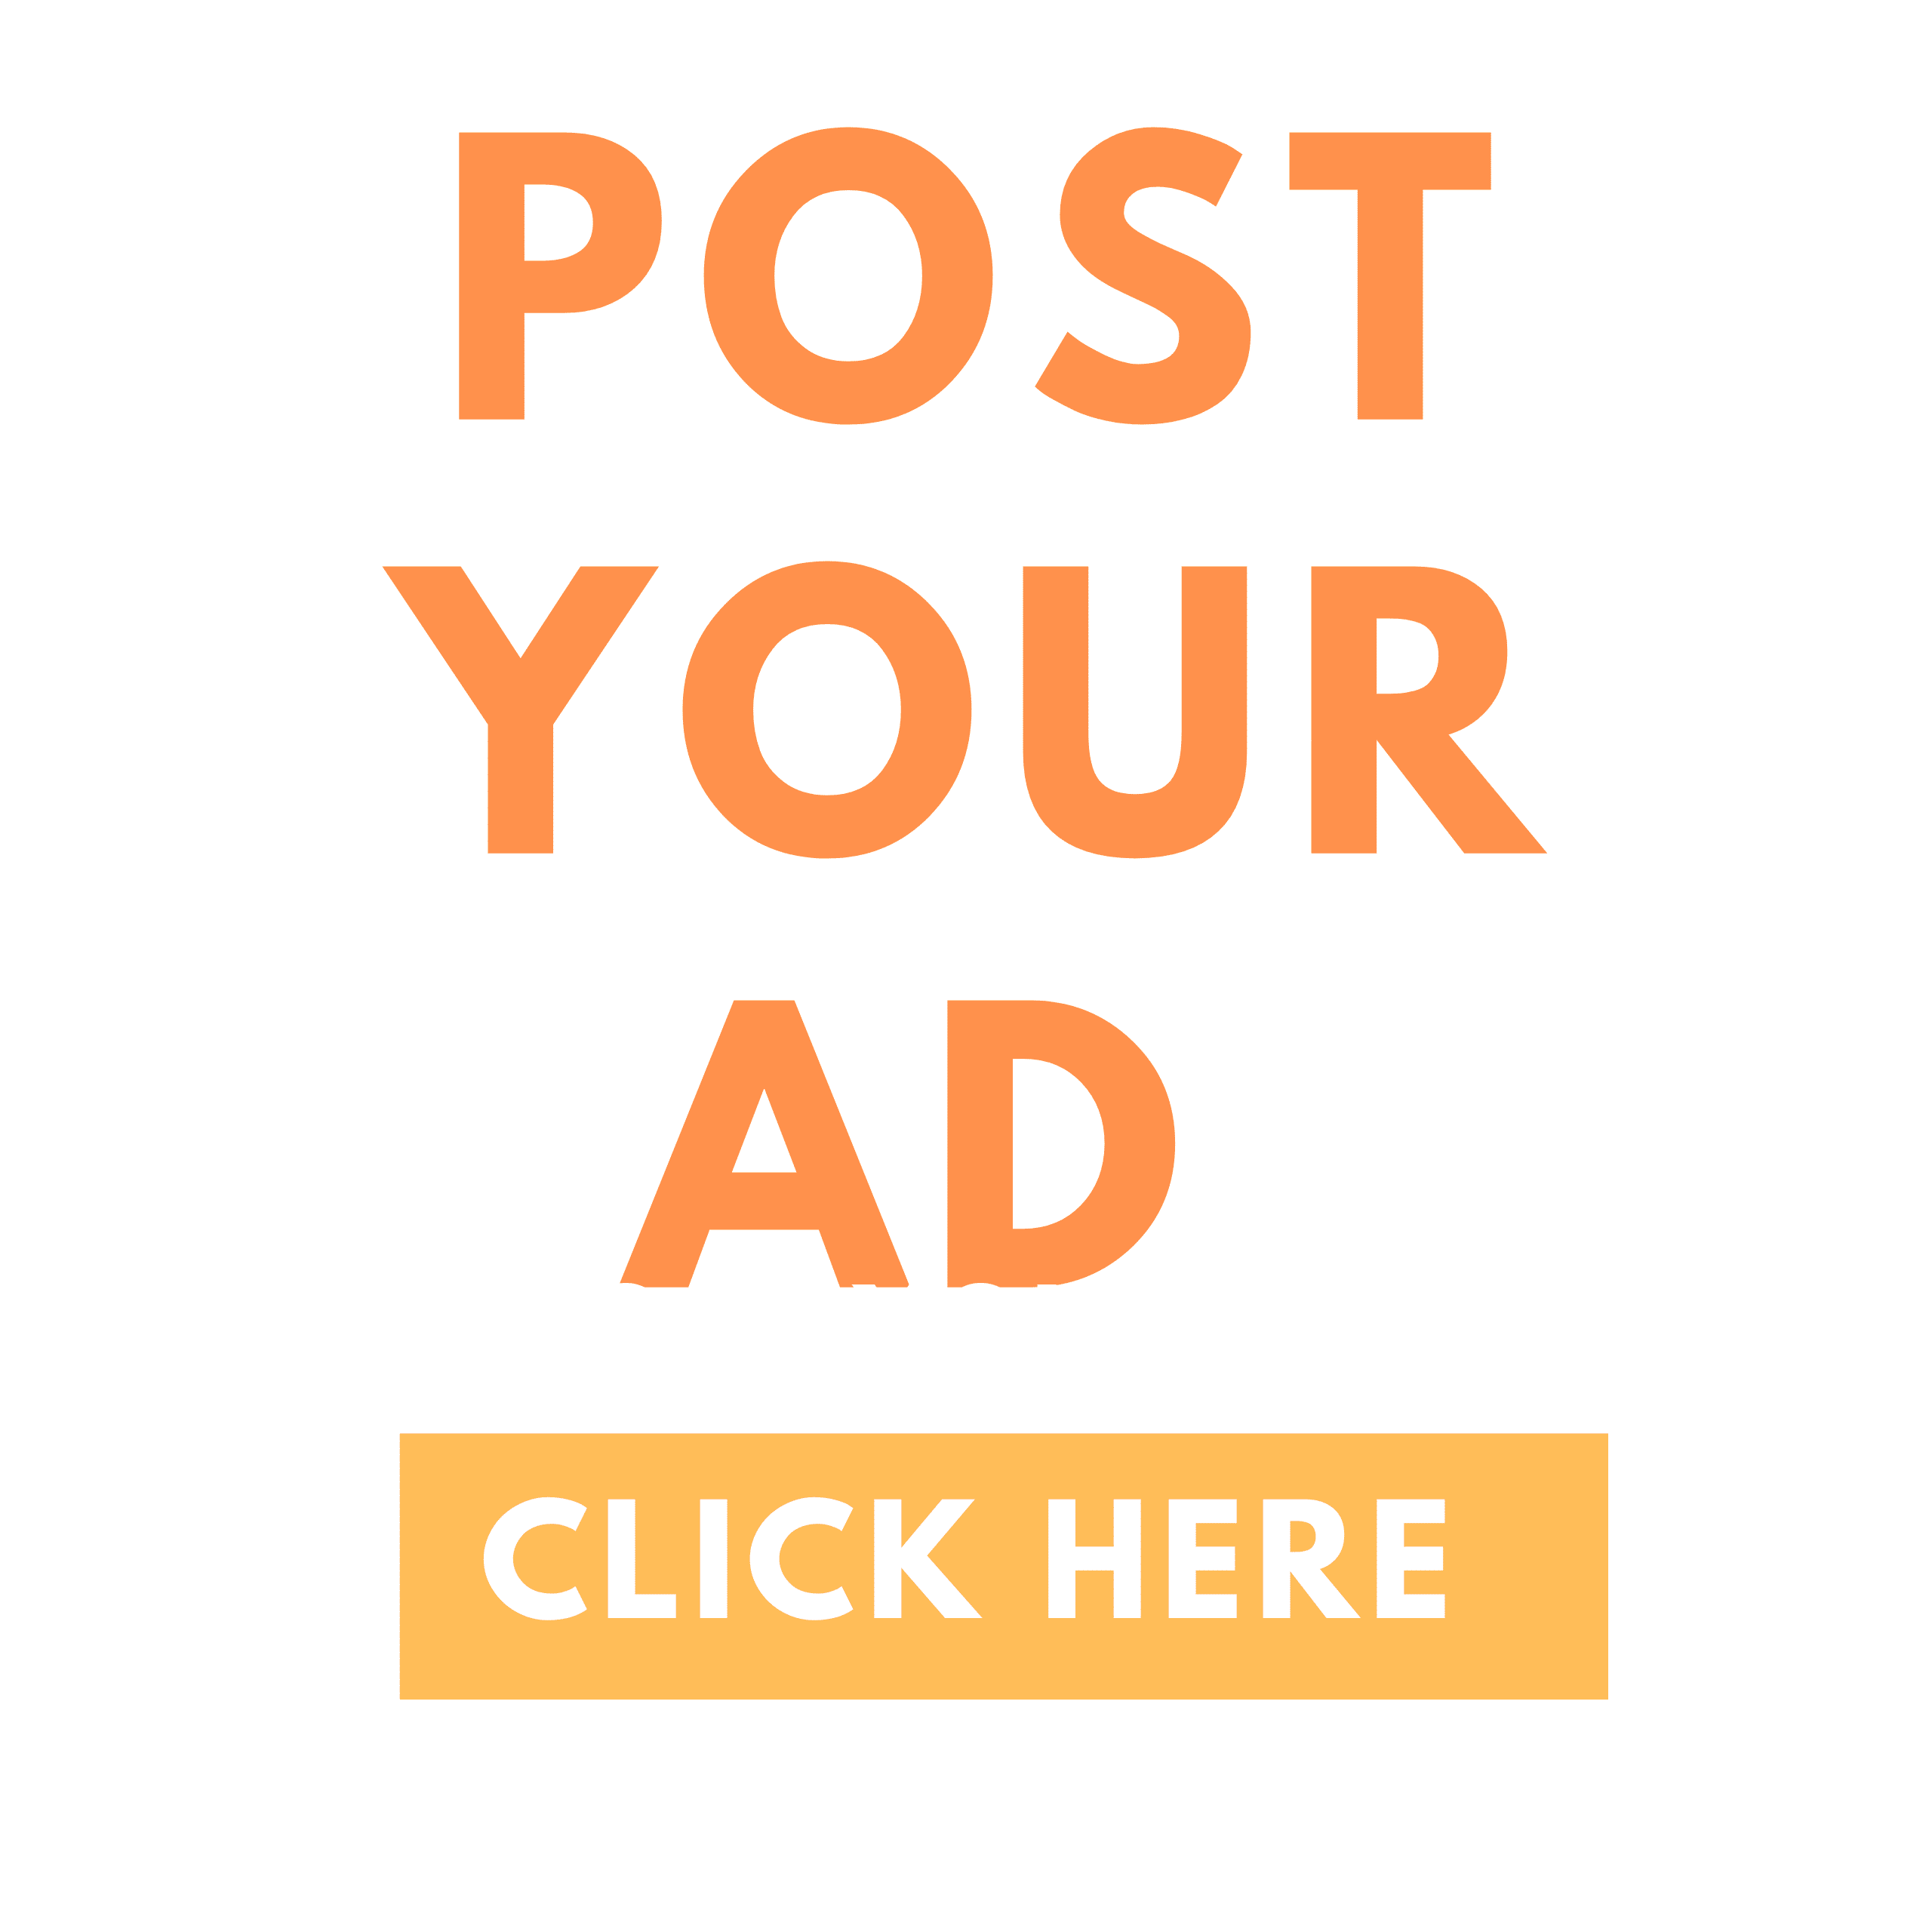 POST YOUR AD HERE